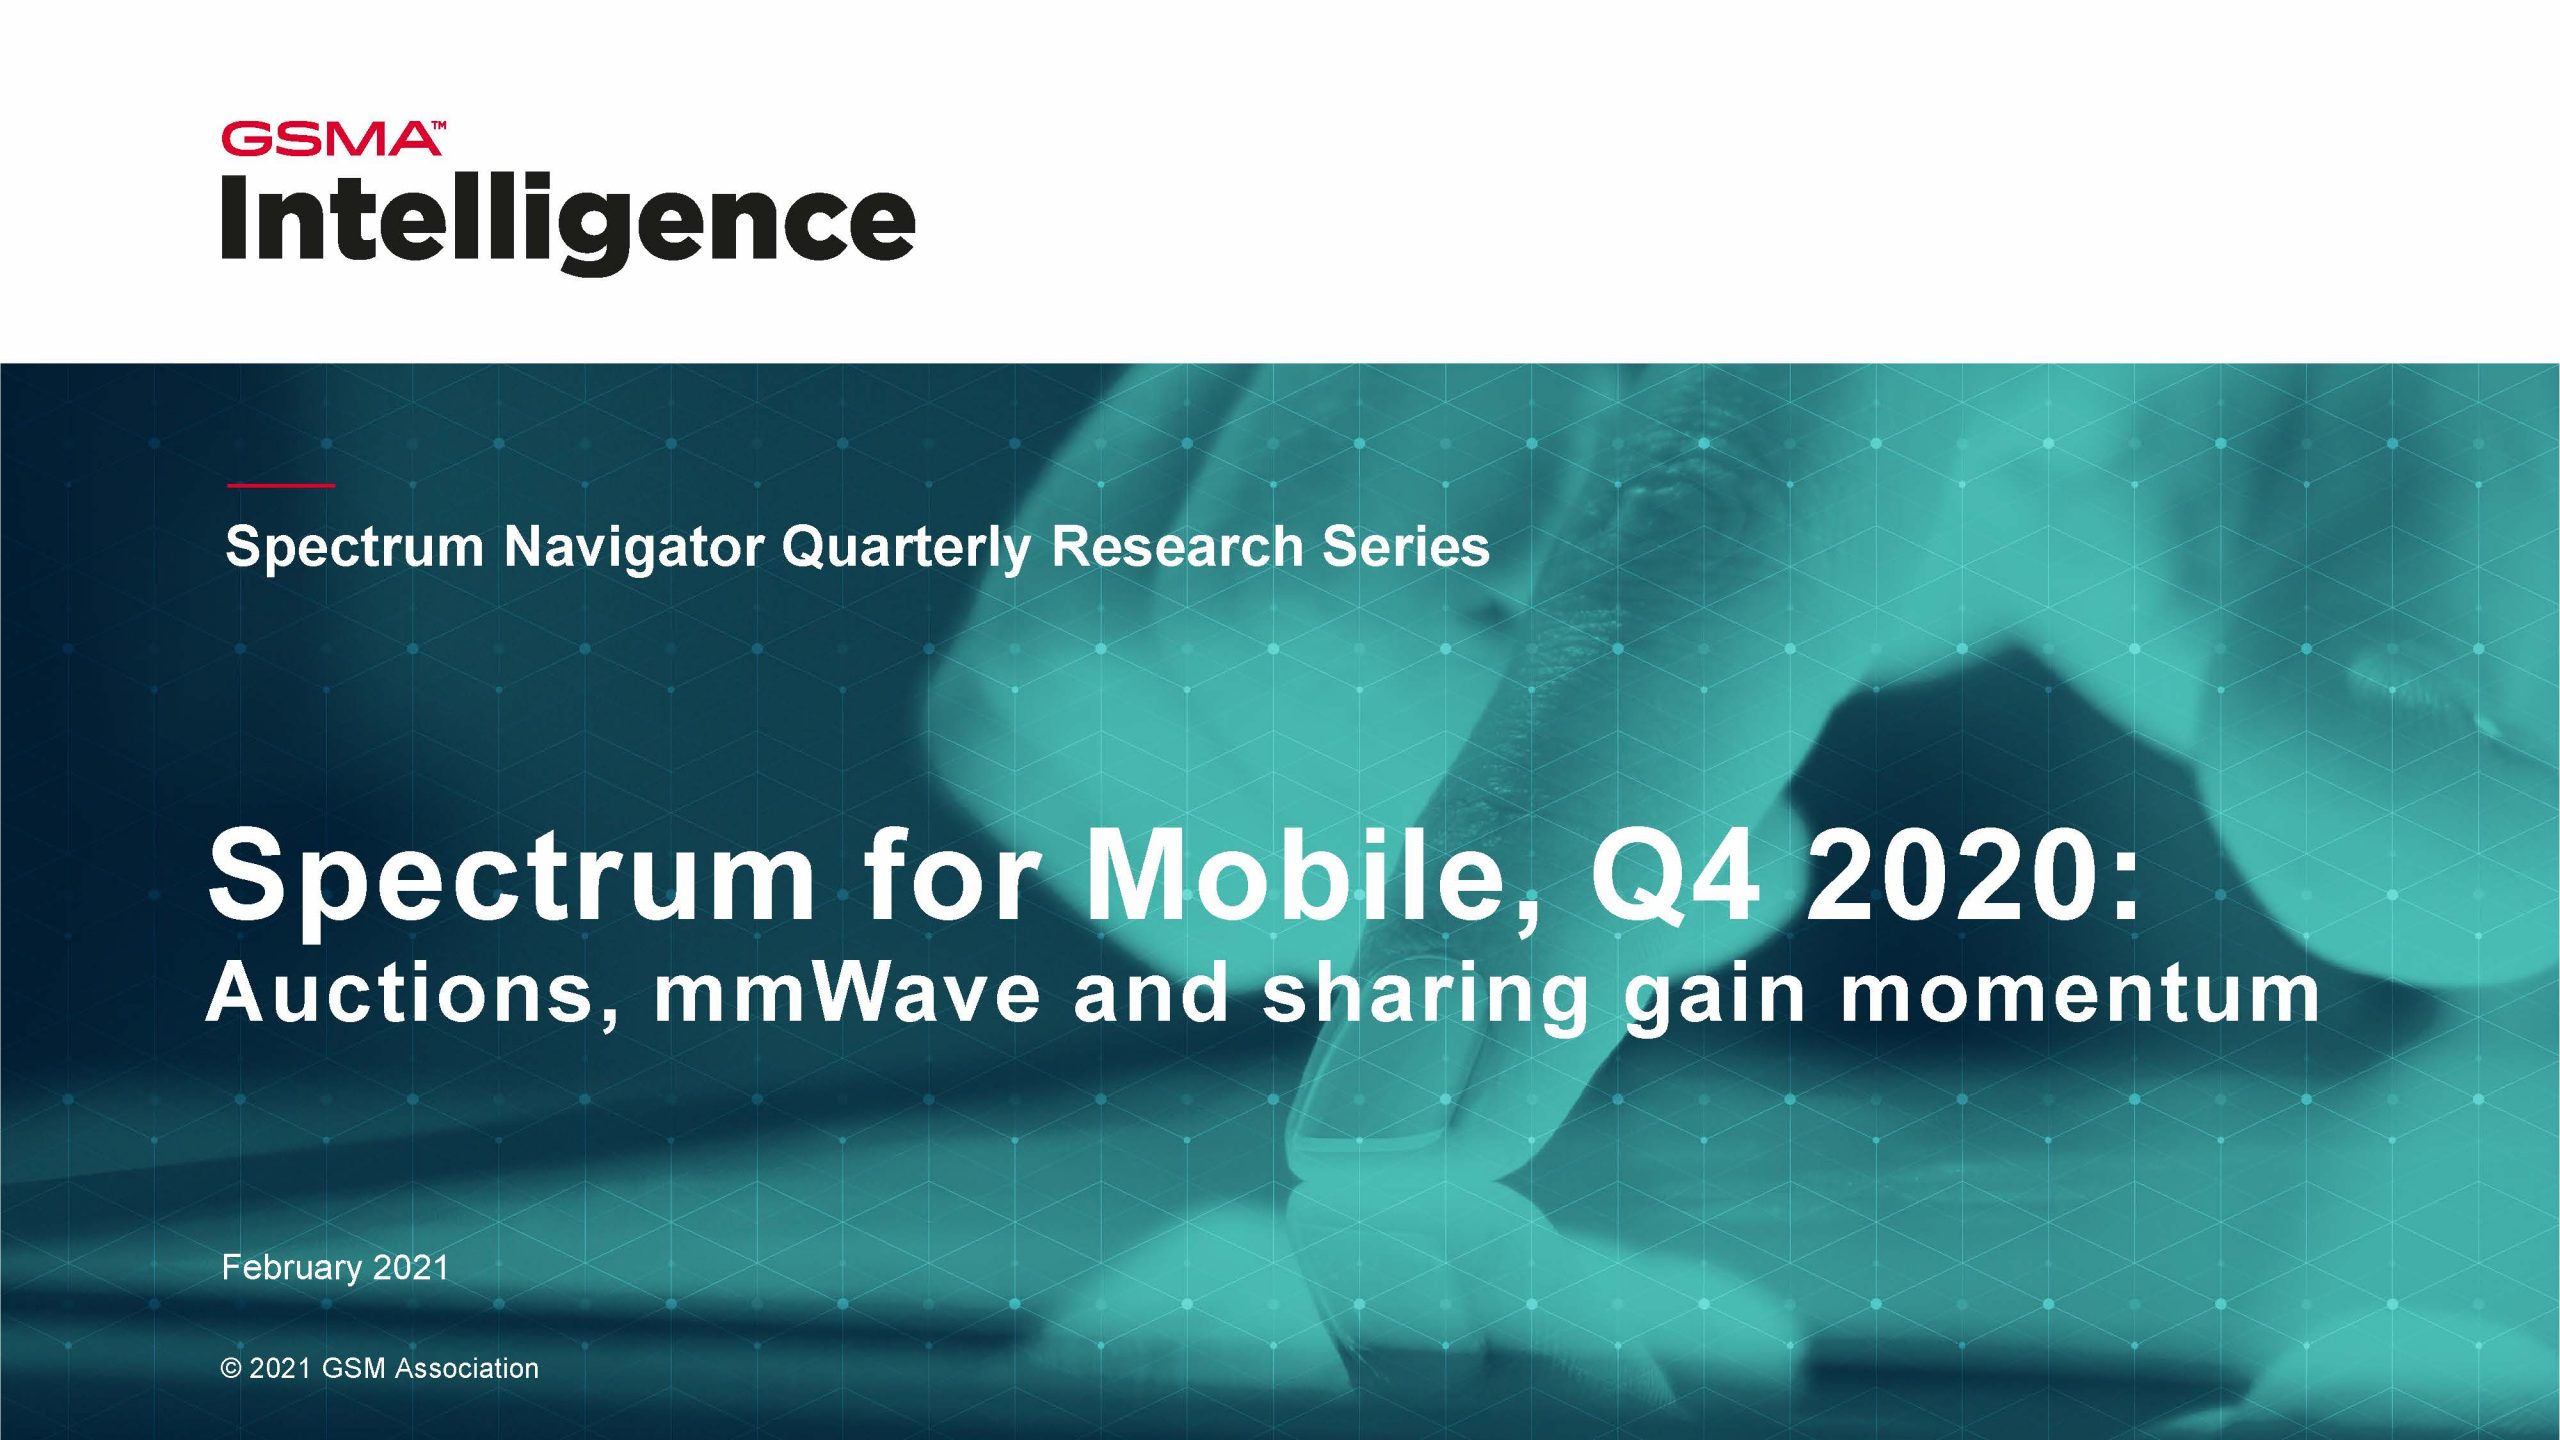 GSMA Intelligence – Mobile Spectrum Trends and Insights image